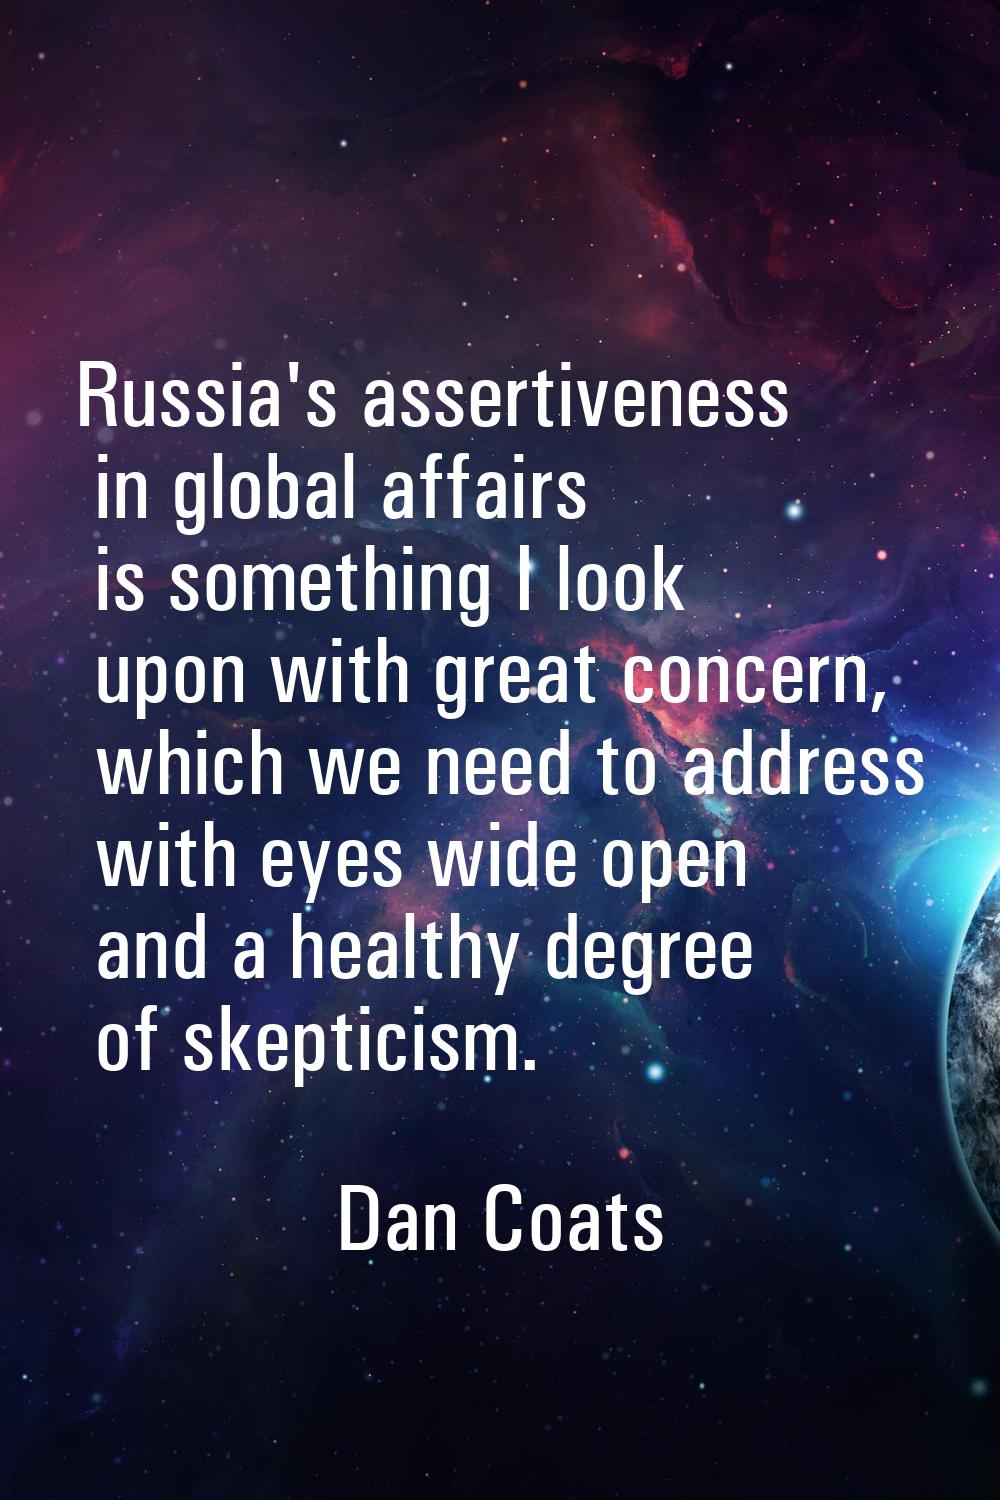 Russia's assertiveness in global affairs is something I look upon with great concern, which we need